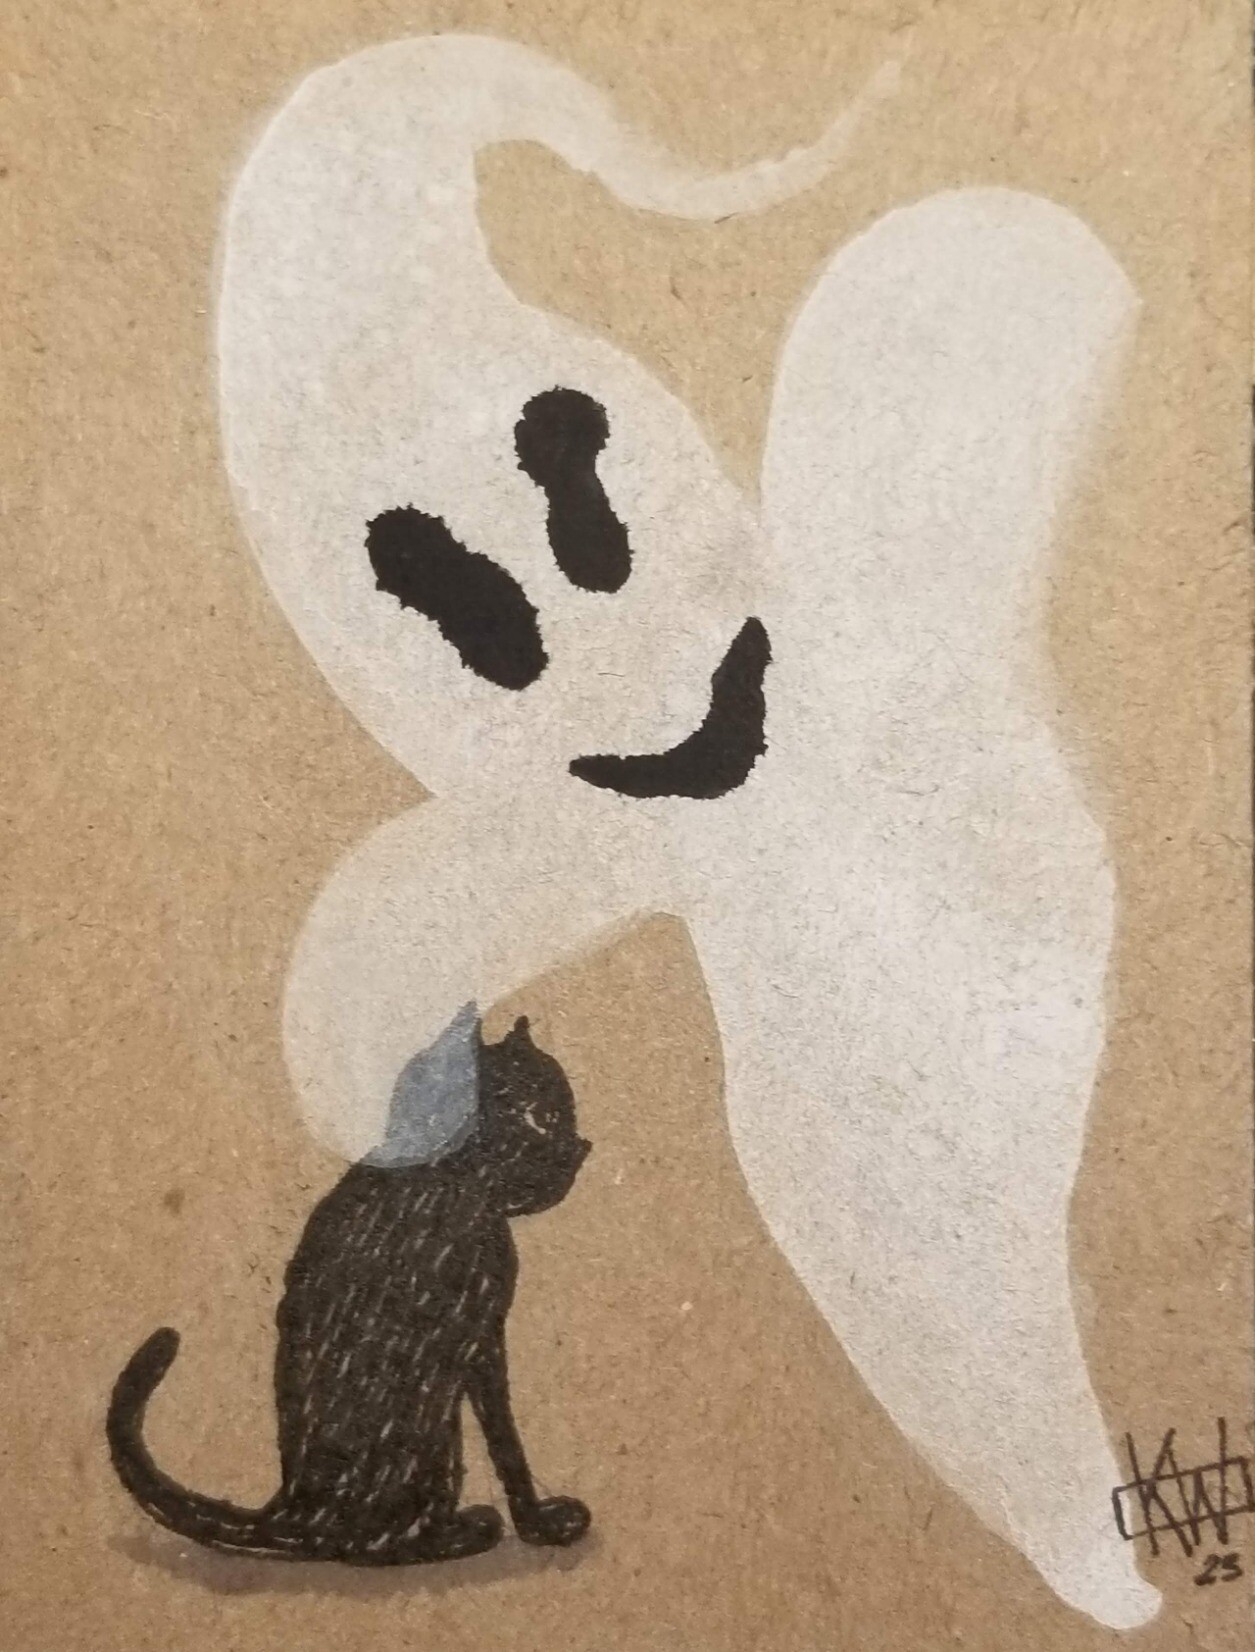 Watercolor & ink on brown cardboard. A black cat sits happily on the ground as a ghost pets it. The ghost's typically compact form is being stretched & distorted, but she still looks happy to be petting the cat.